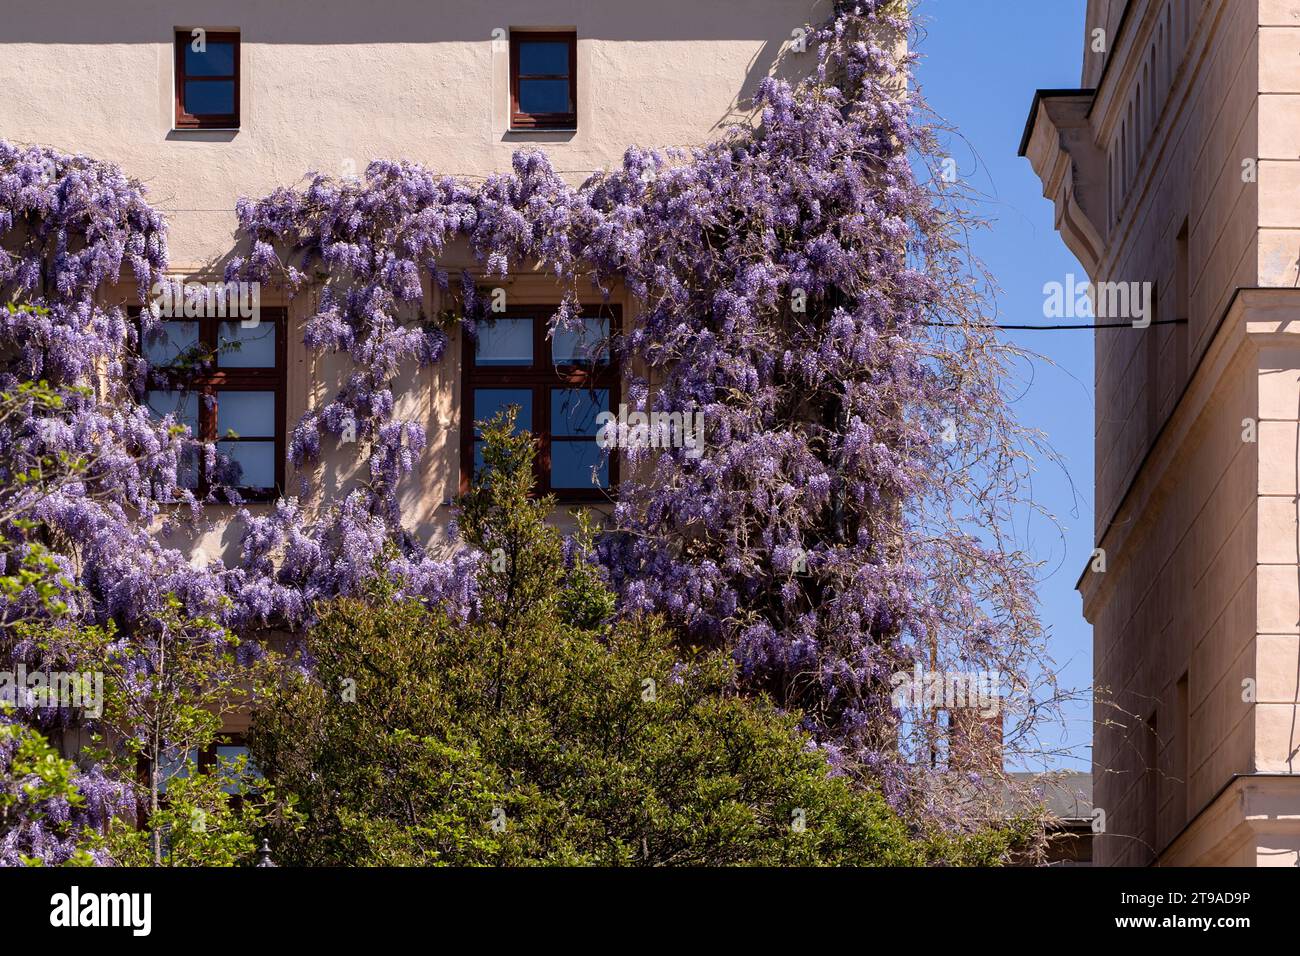 The side of a building is beautifully decorated with purple wisteria. The flowers hang down, surrounding the windows and covering the wall. Stock Photo